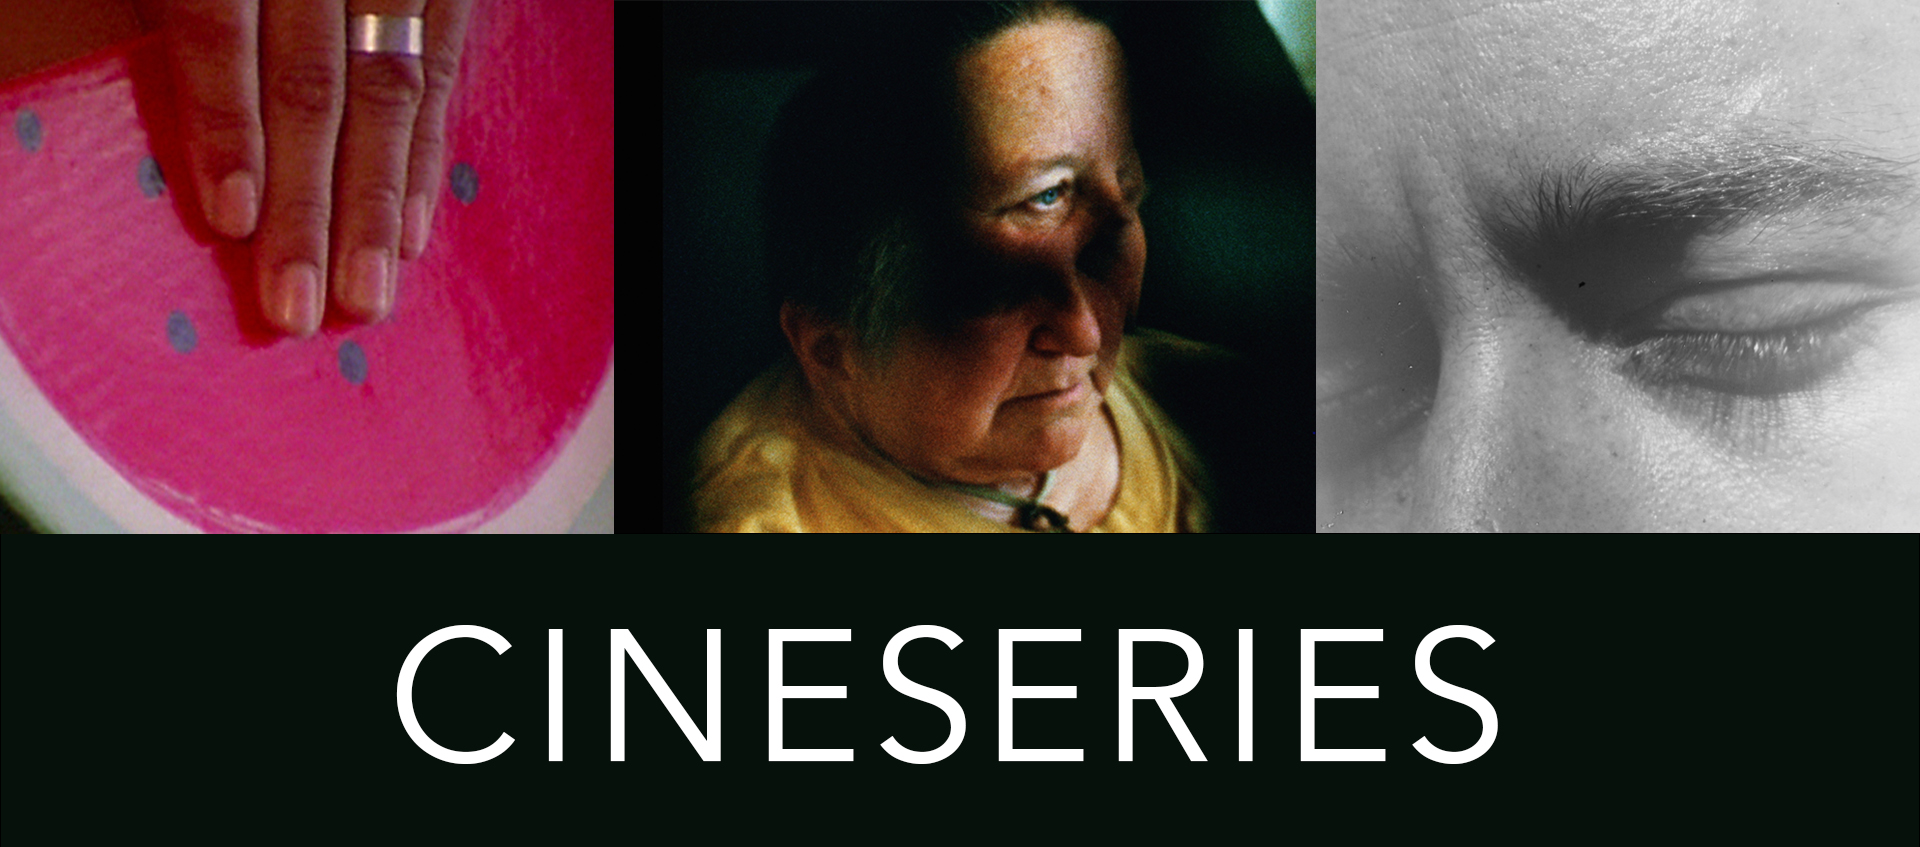 A row of three stills from films in this series. The word “CINESERIES” appears in white font against a black bar running horizontally under the stills.